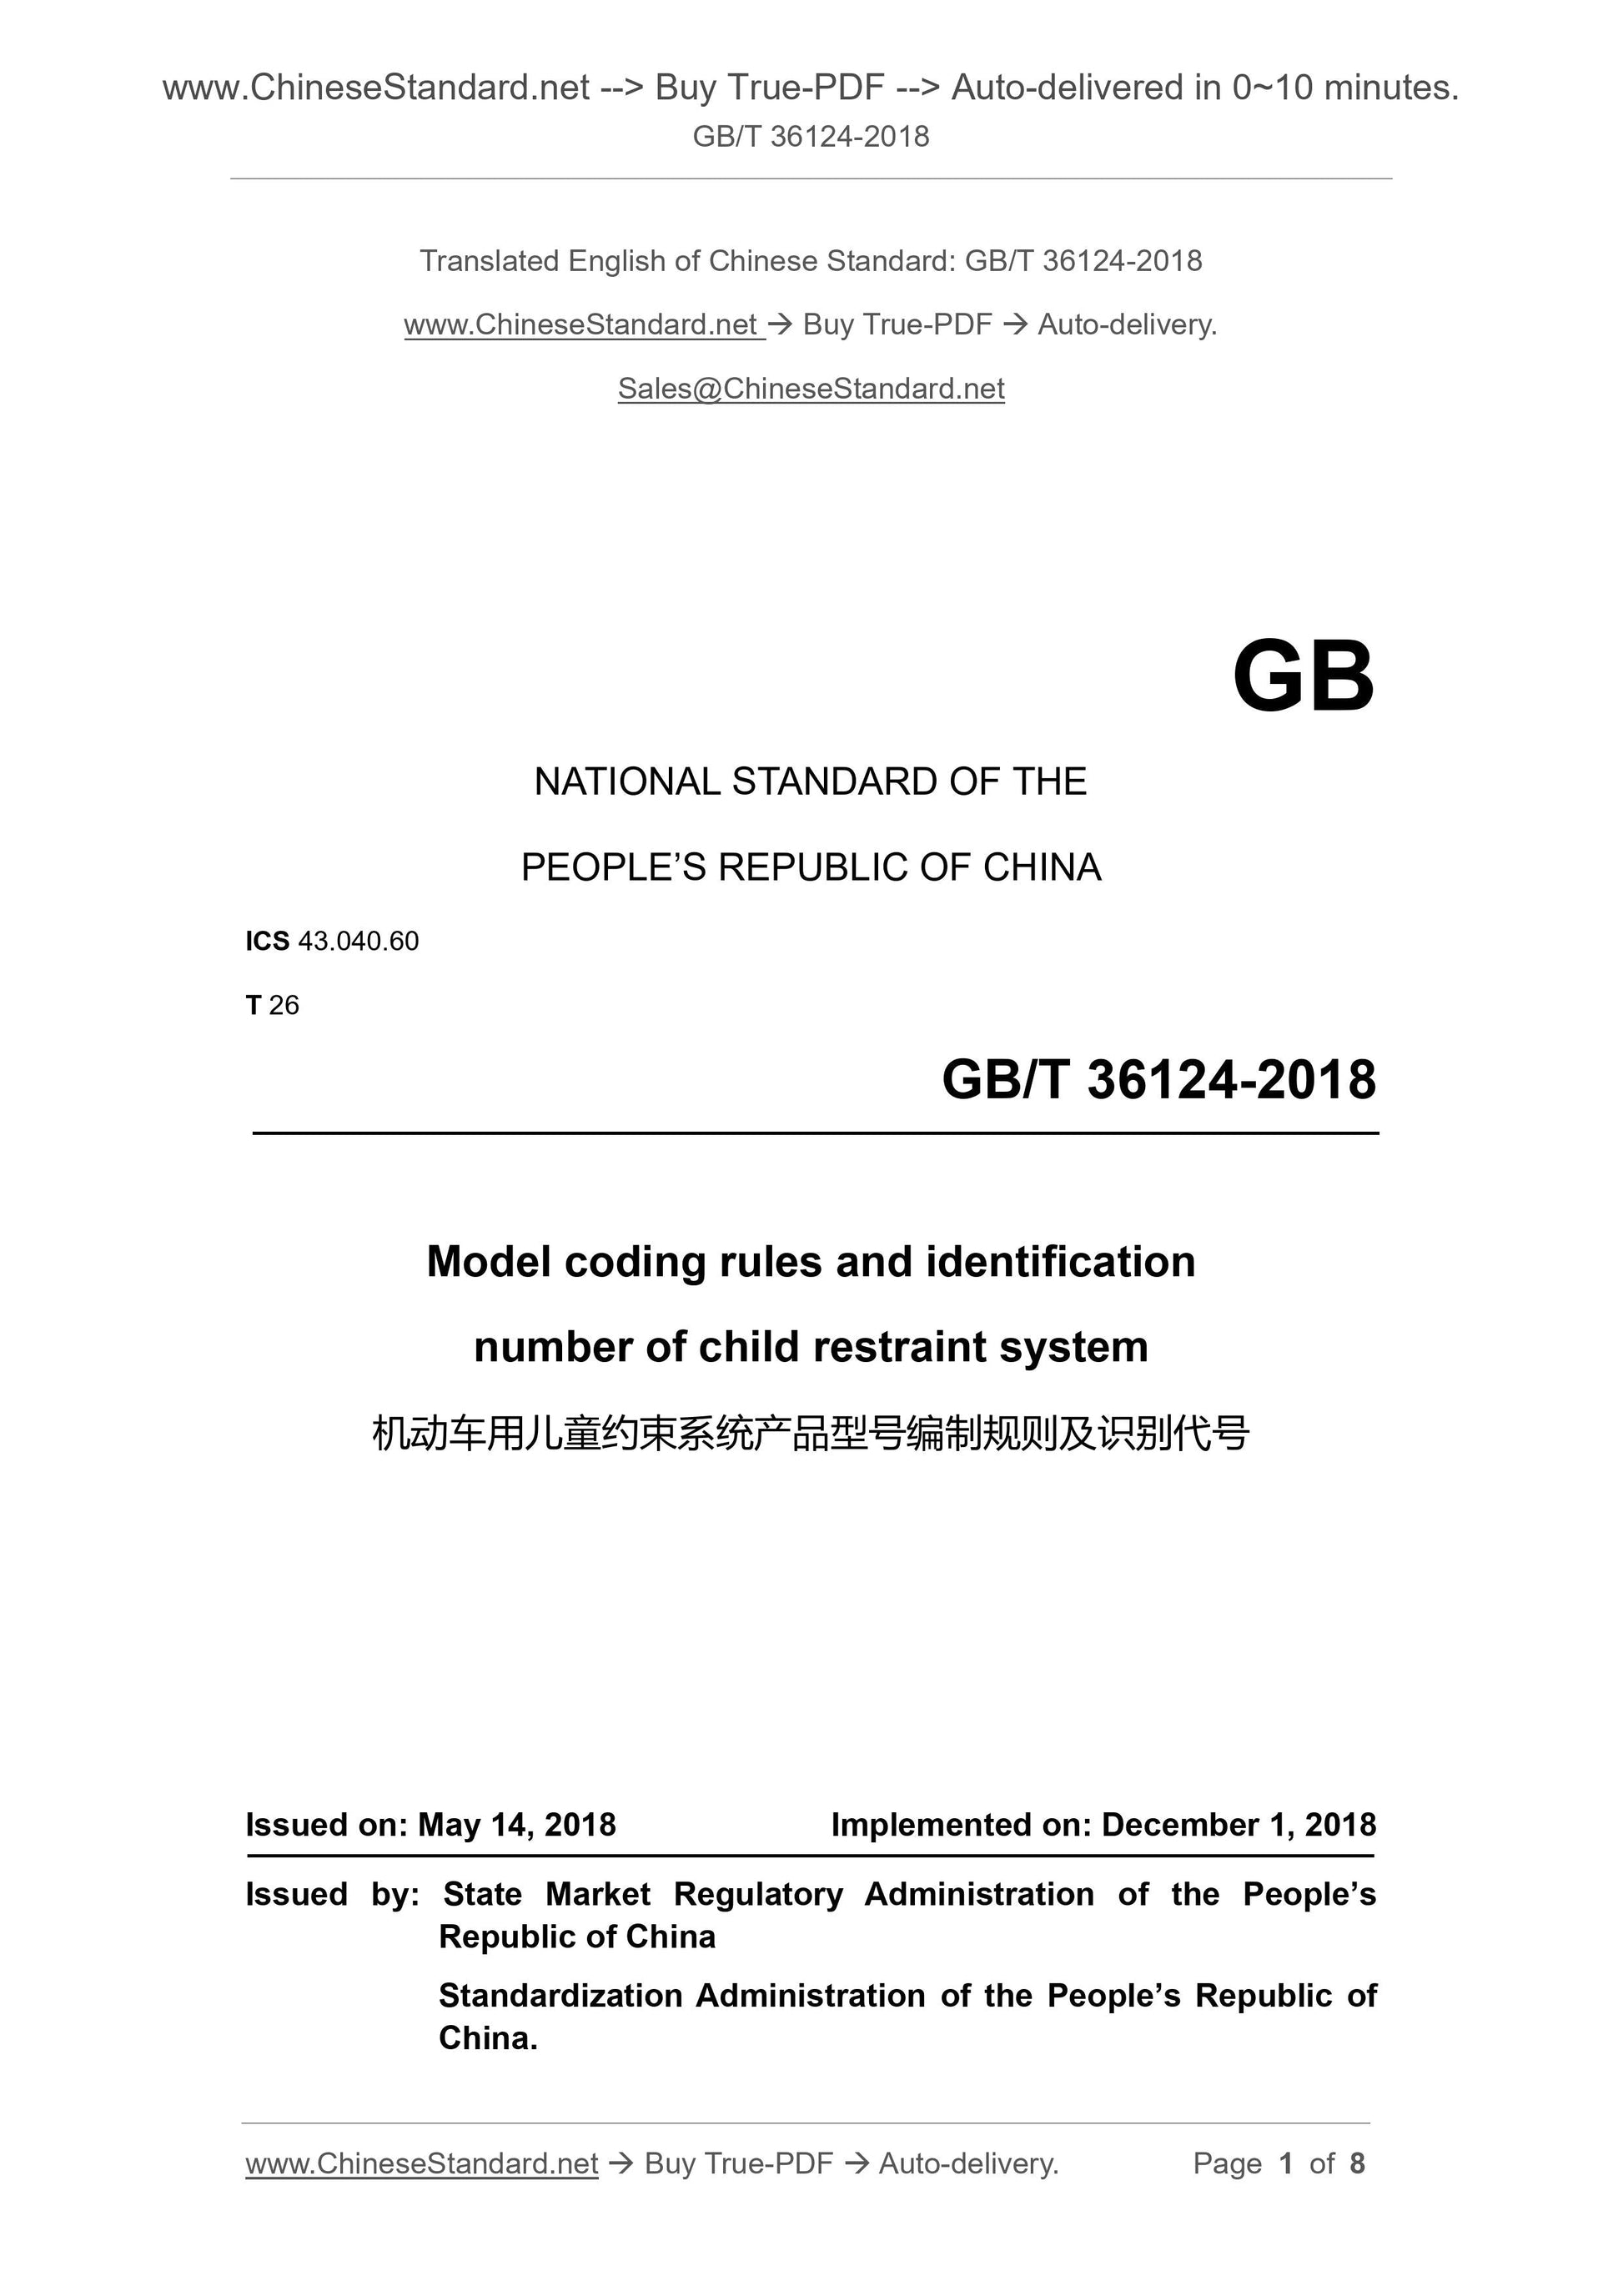 GB/T 36124-2018 Page 1